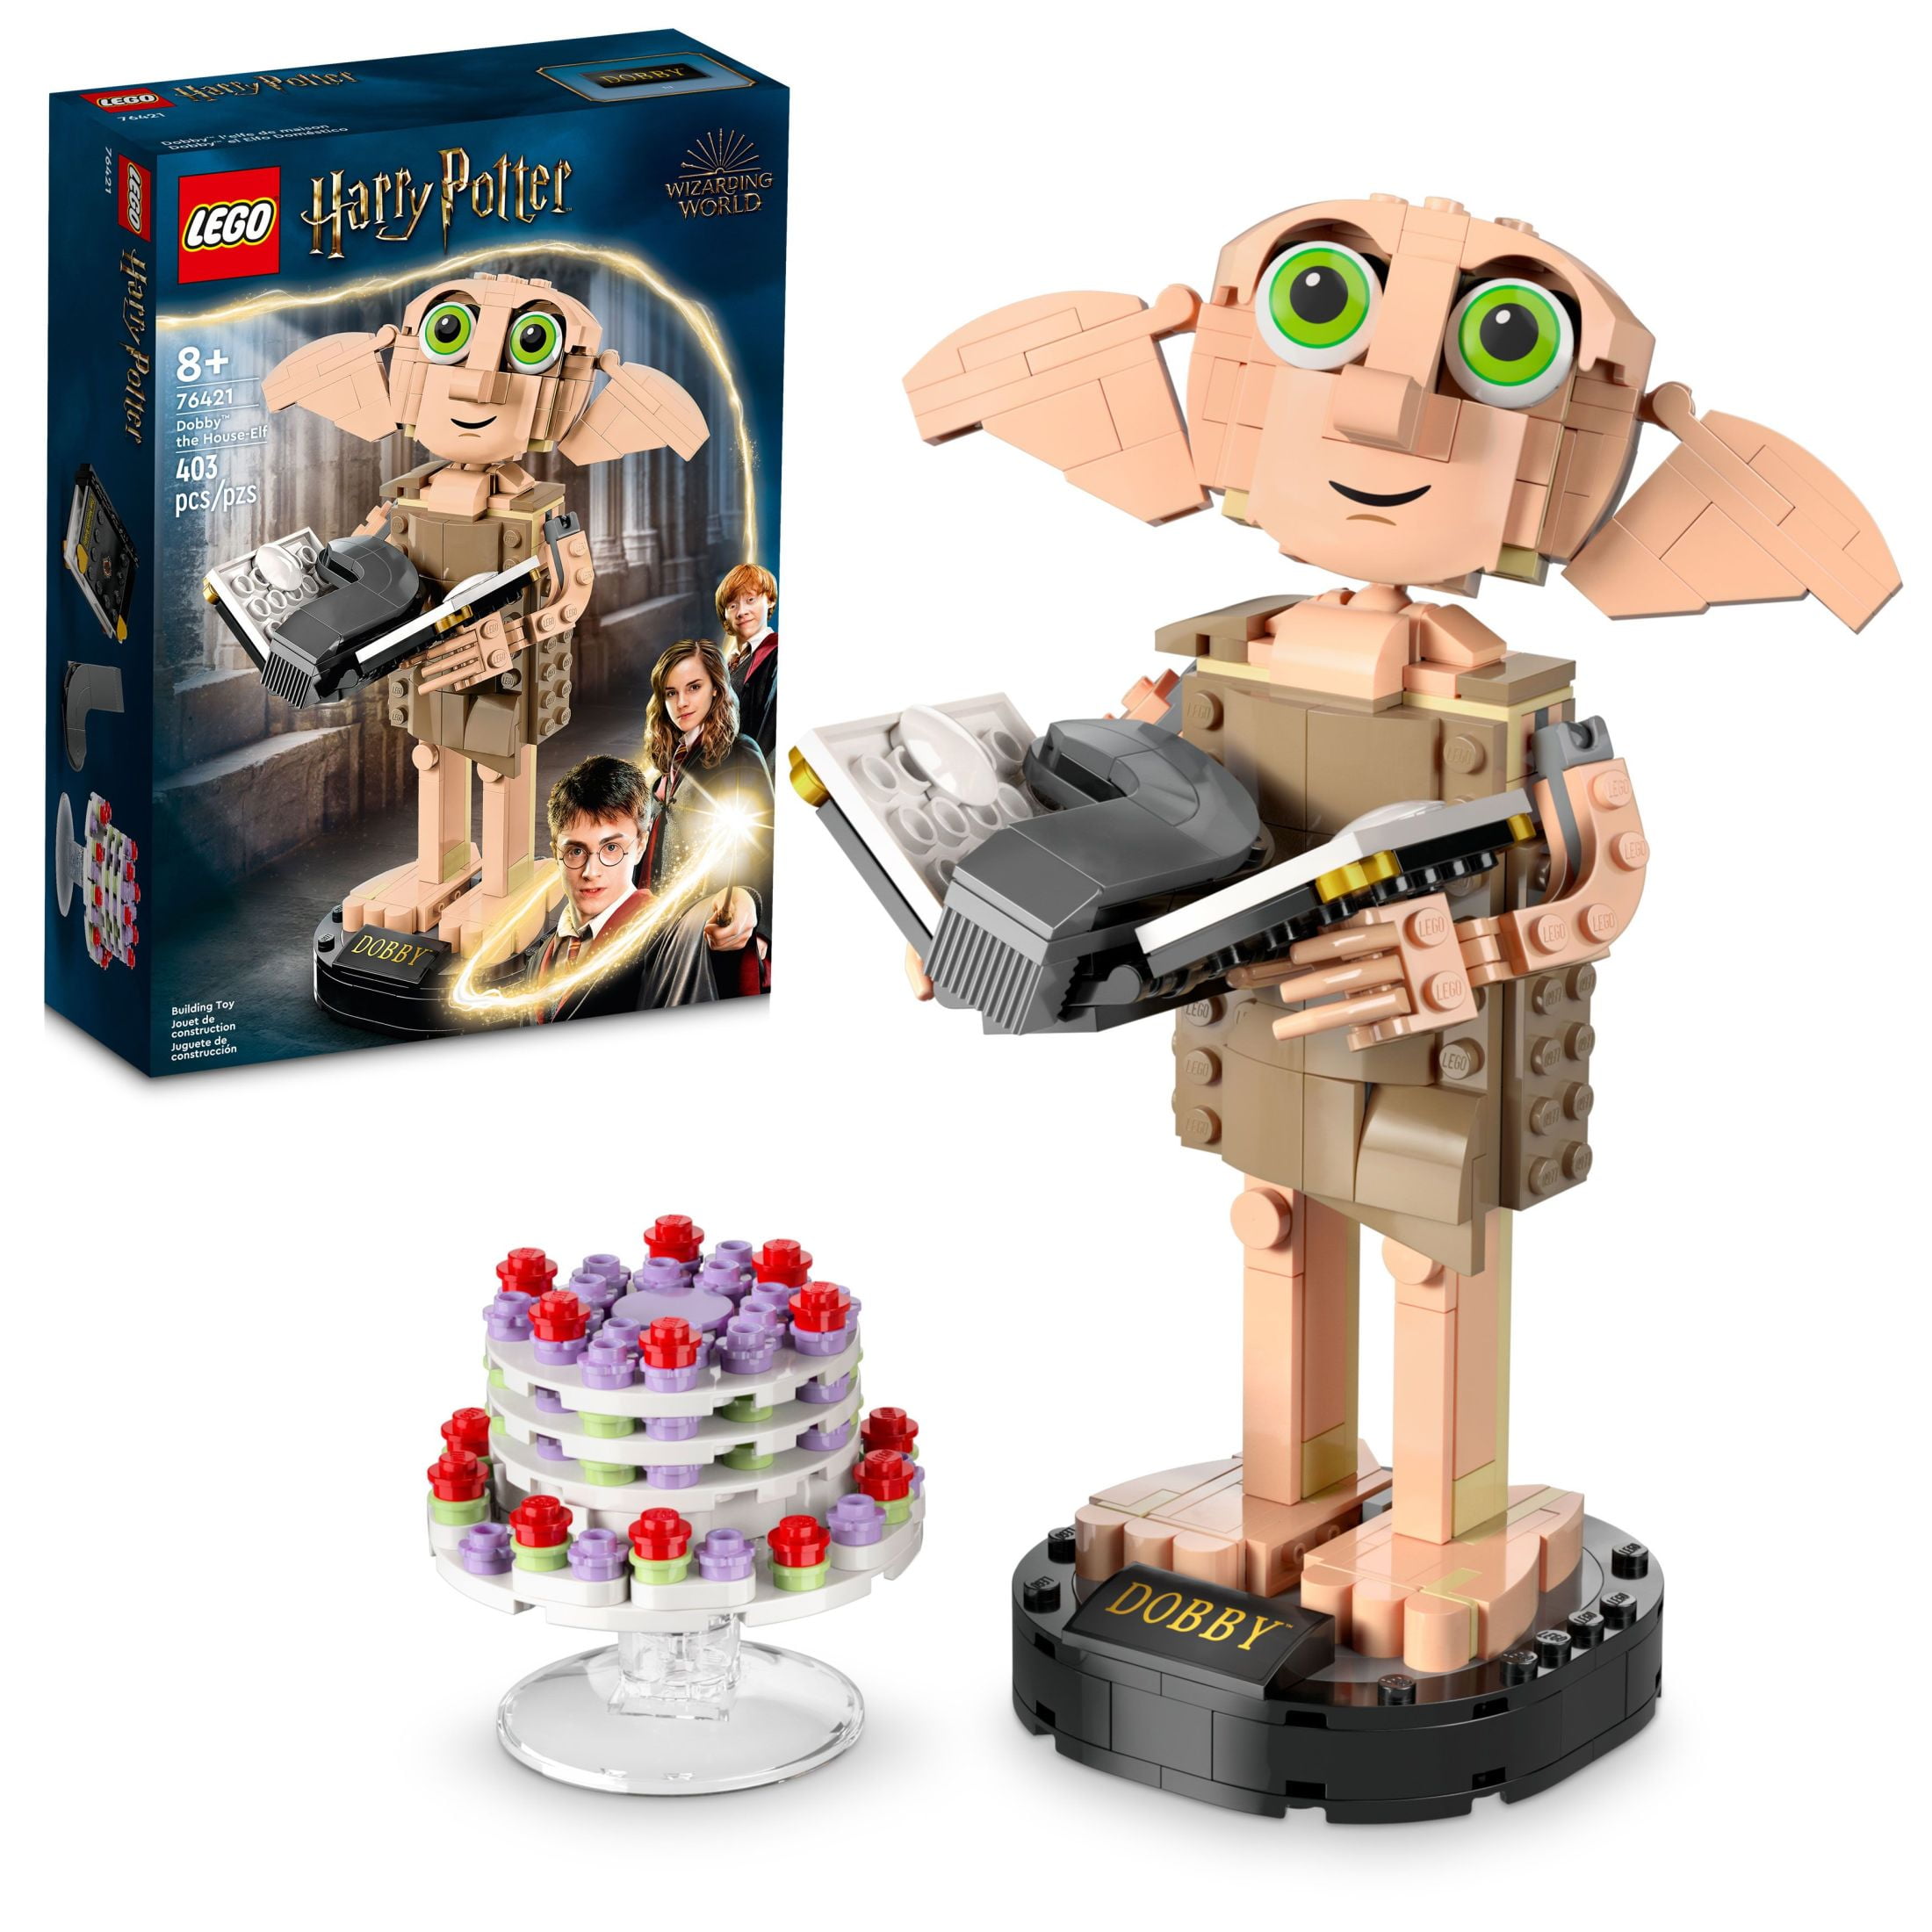 403-Piece Lego Harry Potter Dobby the House Elf Building Toy Set $28 + Free Shipping w/ Walmart+ or $35+